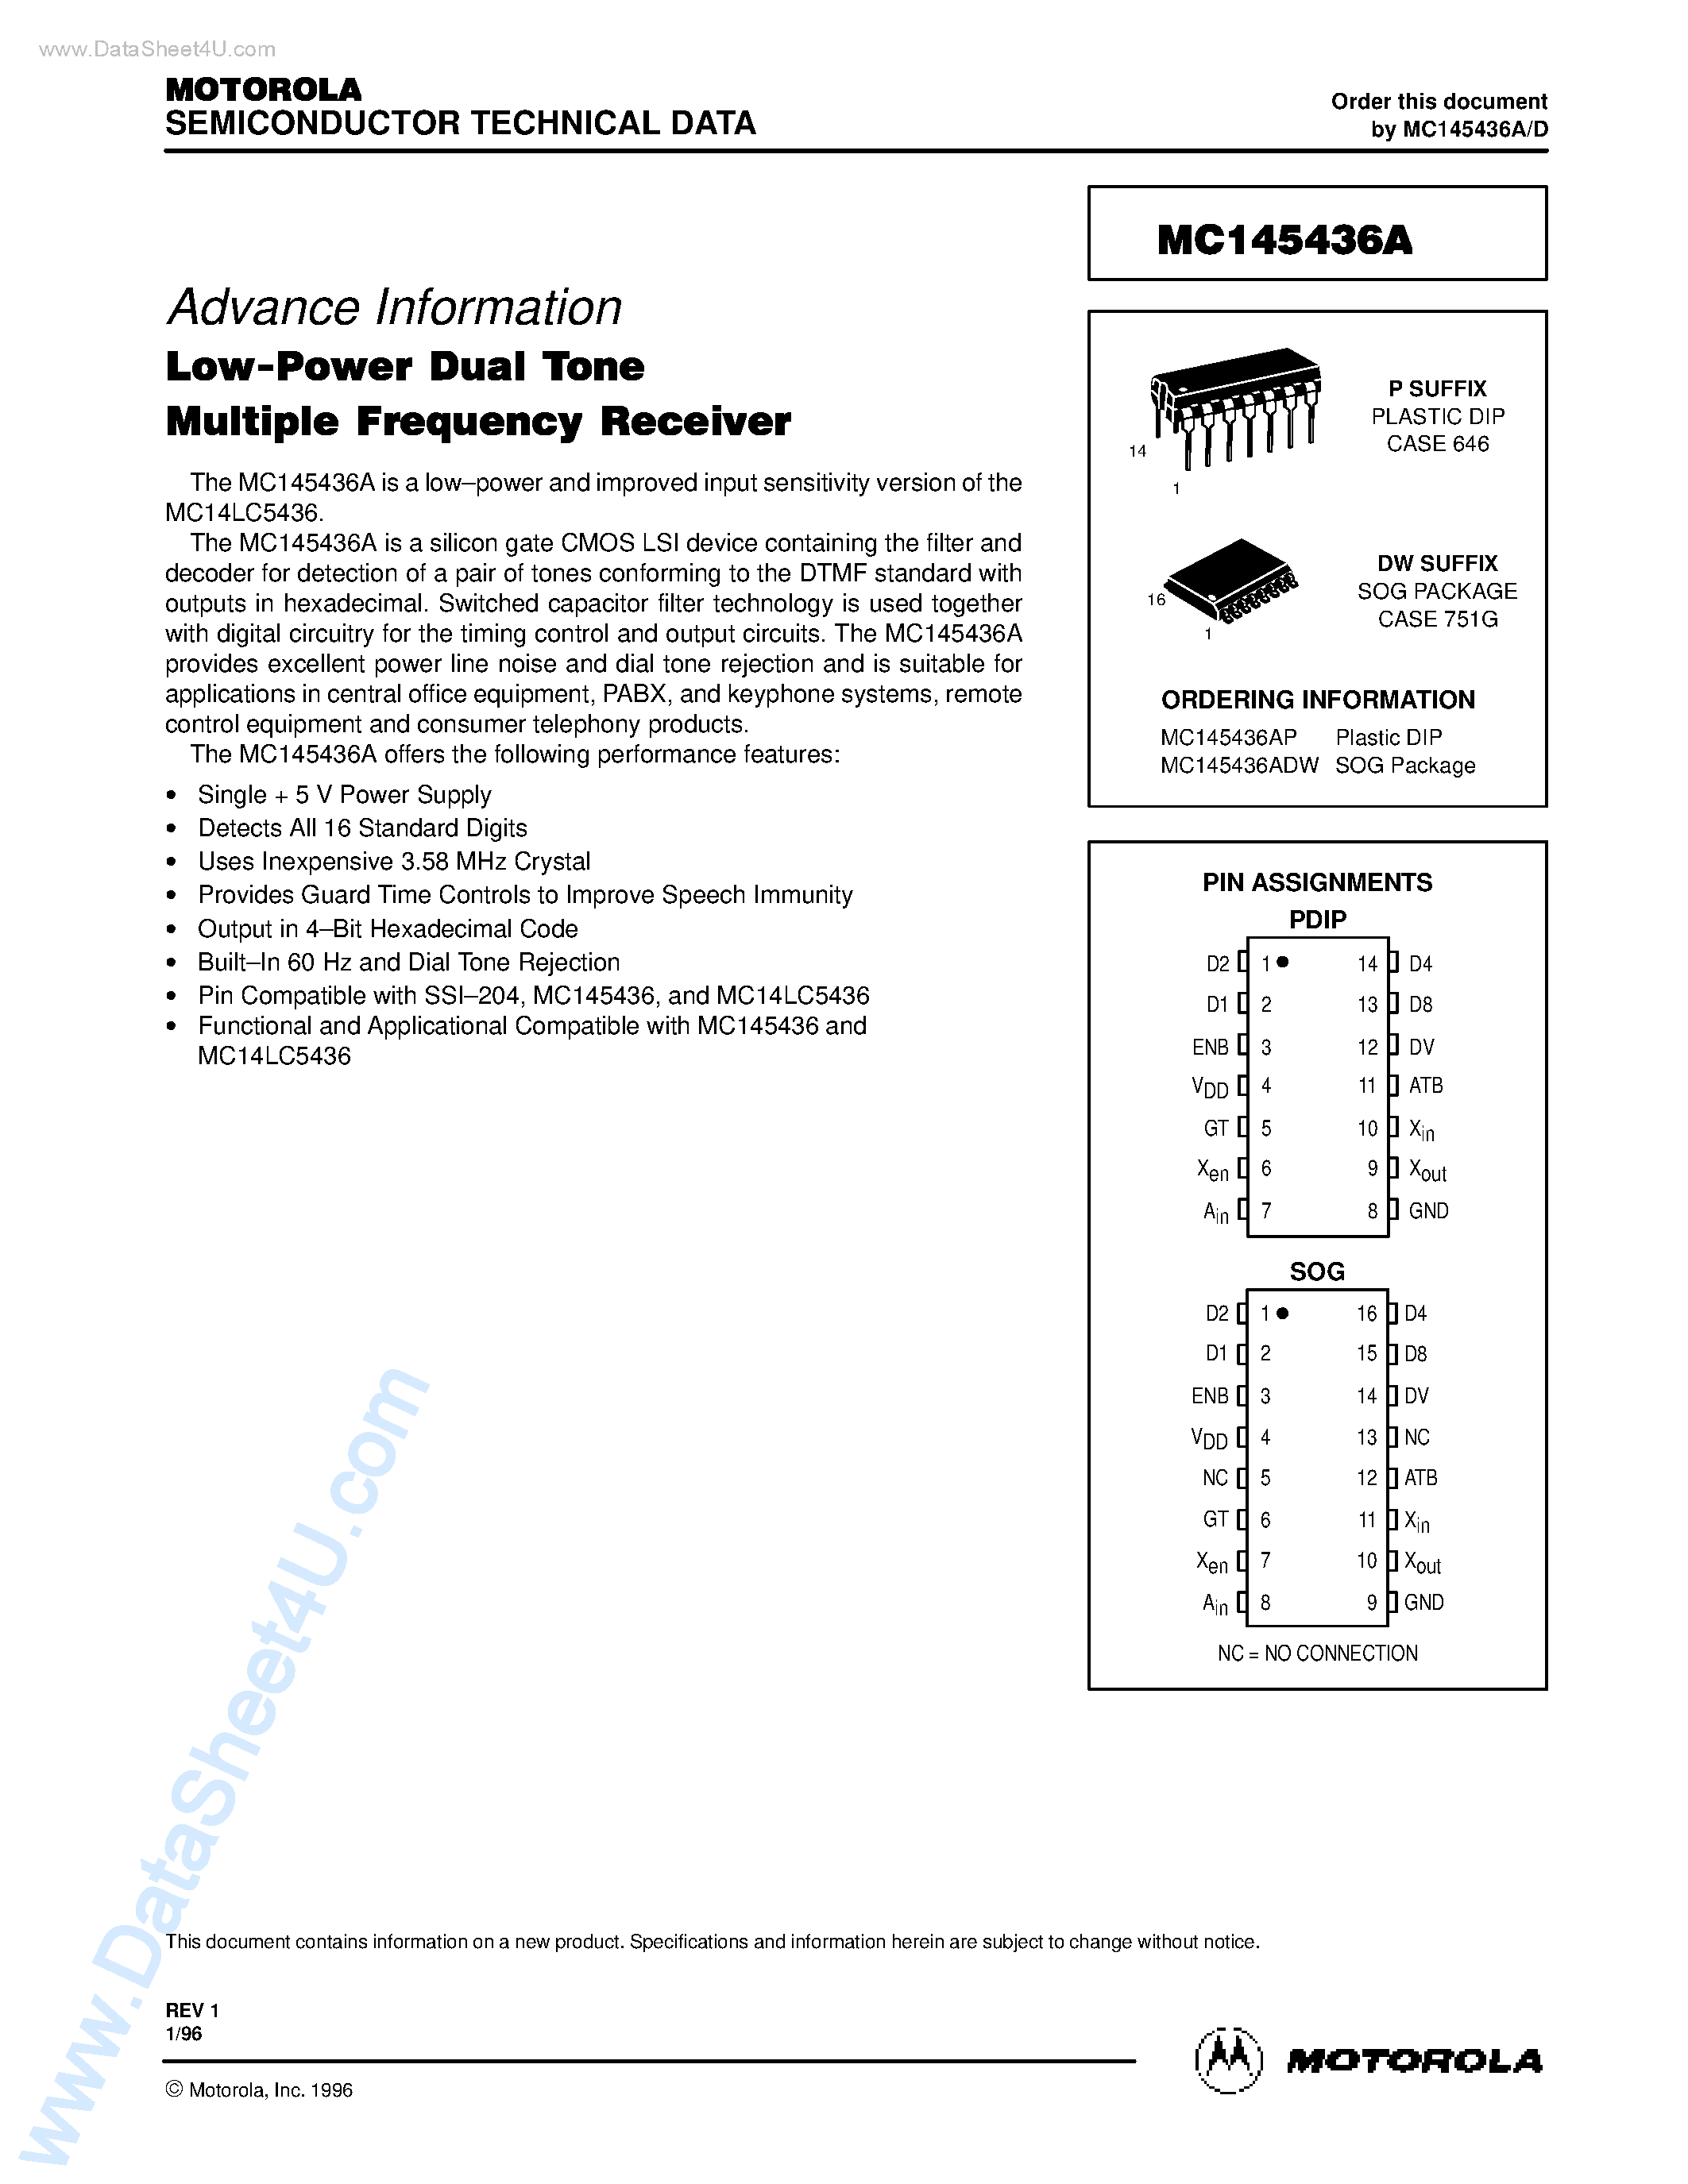 Datasheet MC145436A - Low Power Dual Tone Multiple Frequency Receiver page 1